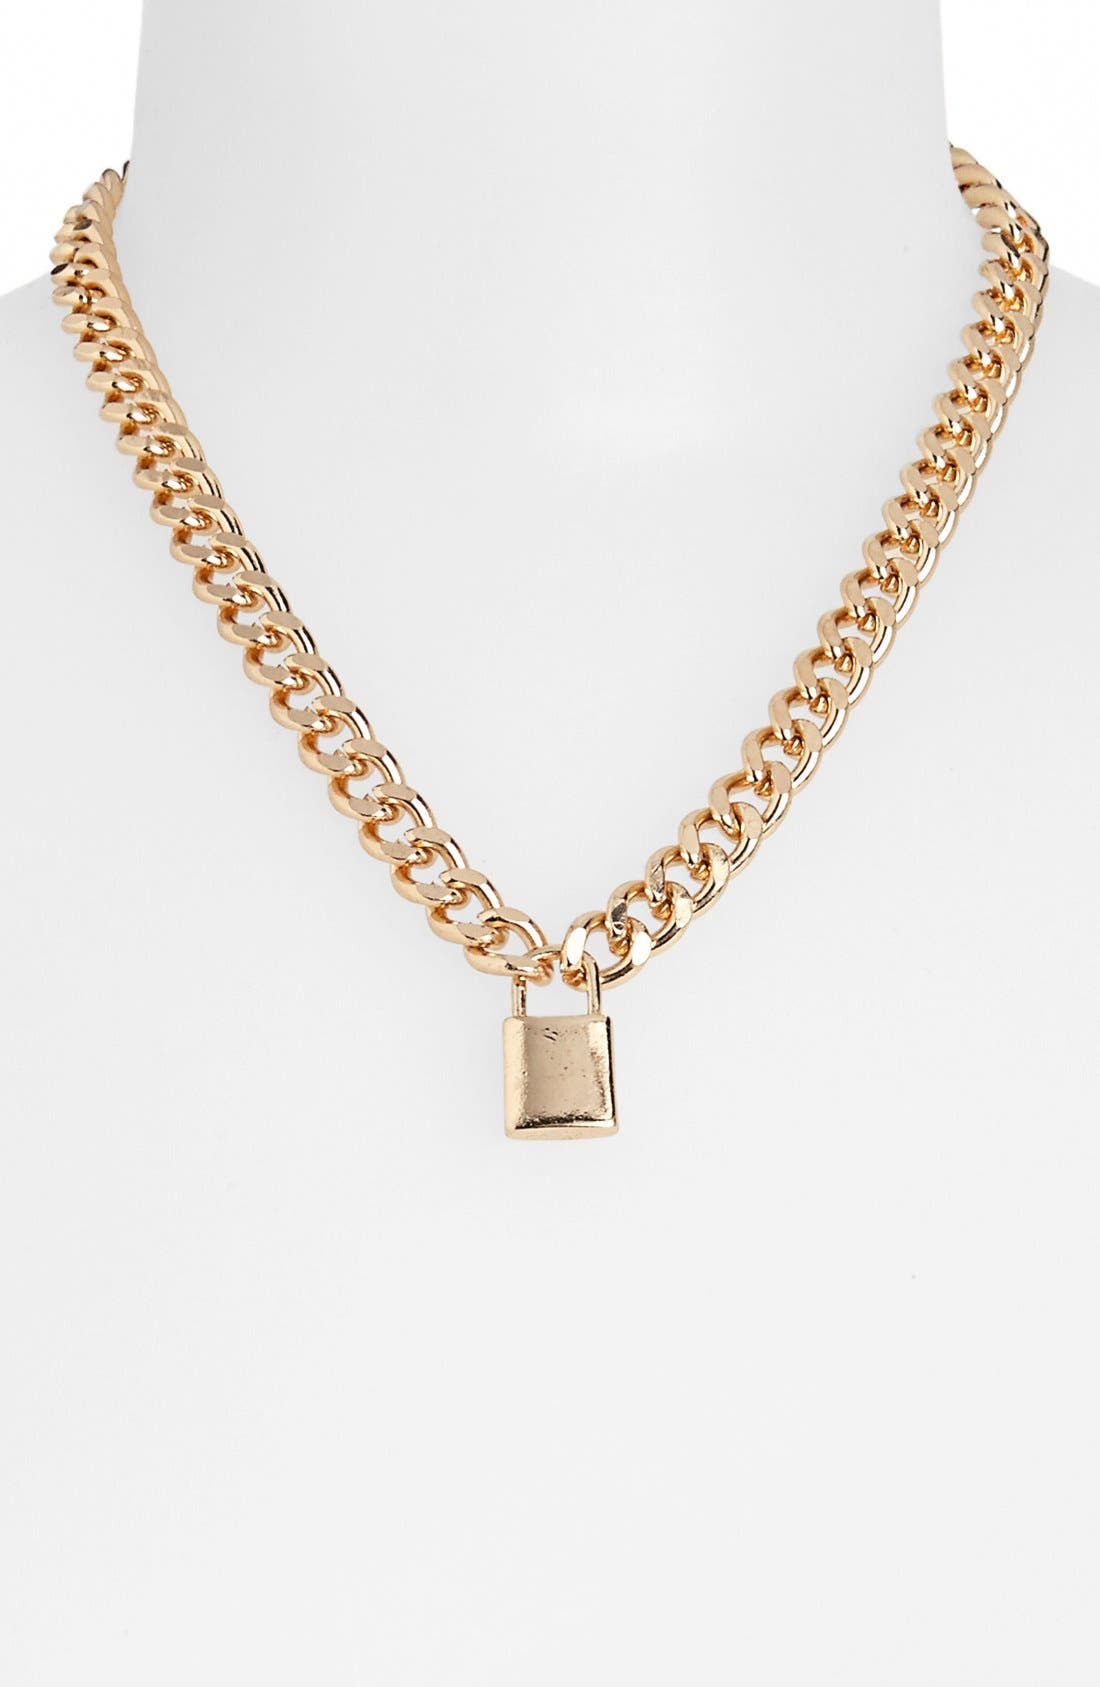 GOLD PADLOCK  LOCK NECKLACE CHAIN PENDANT GOLD CHAIN TOPSHOP 